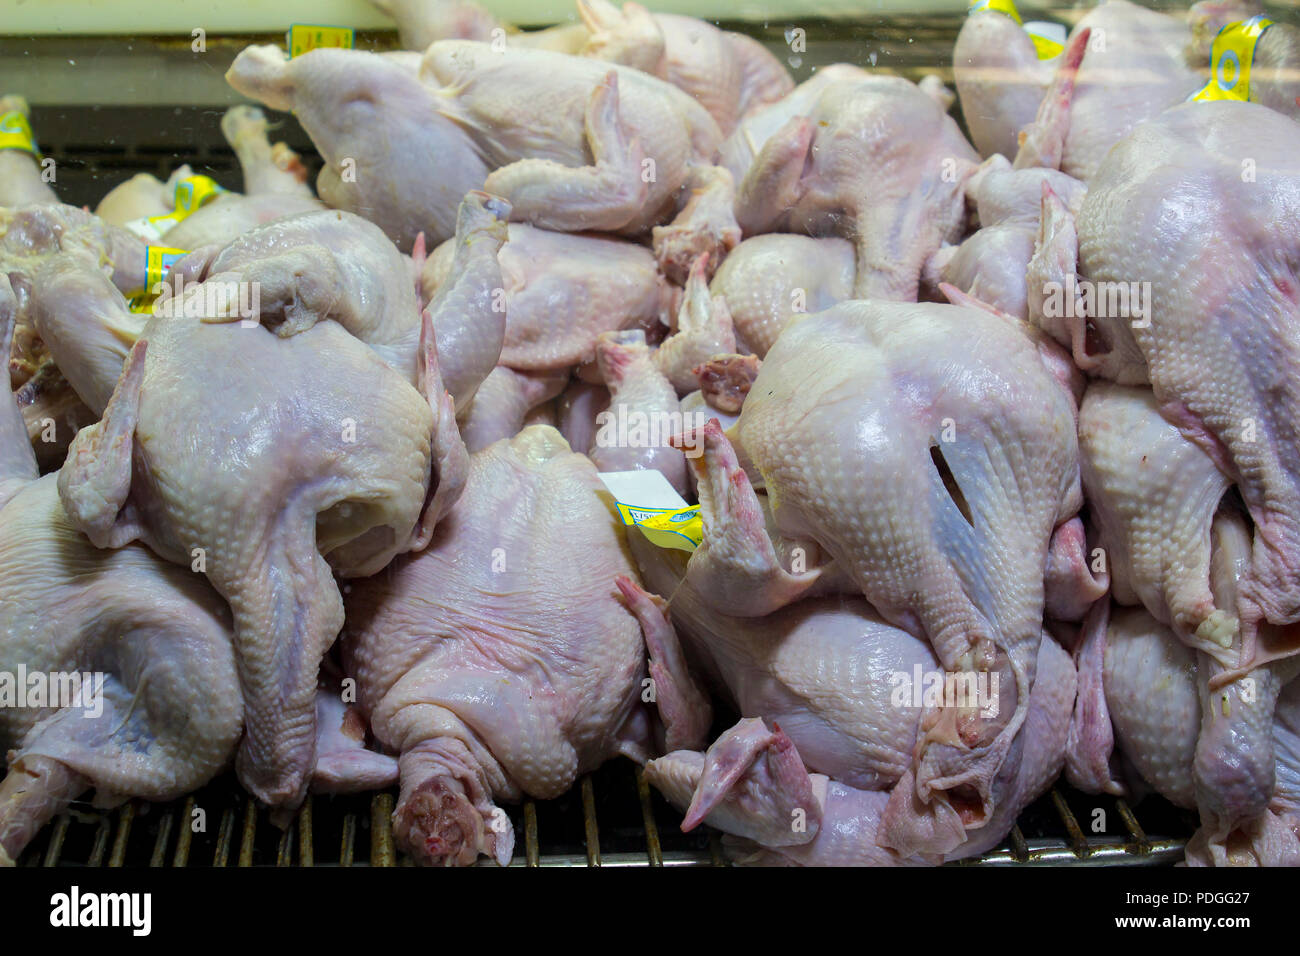 11 May 2018 A stock of chickens in a small butchers shop in the Arab Quarter of the old City of Jerusalem Israel Stock Photo